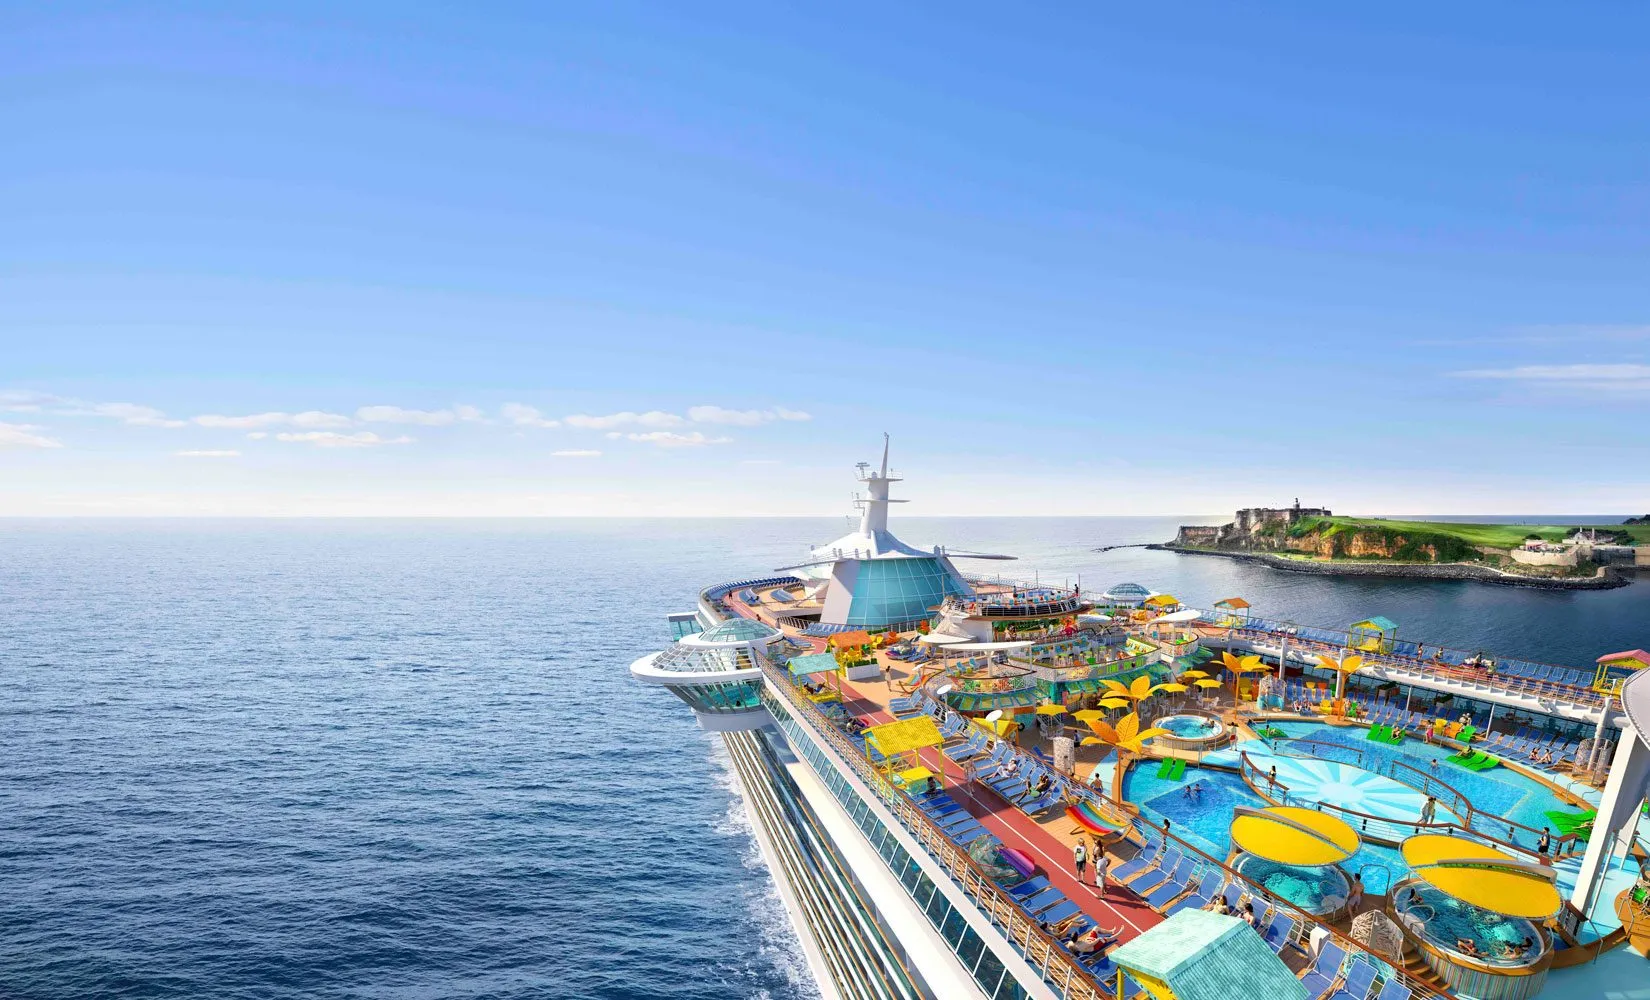 Royal Caribbean Freedom of the Seas Review - Reviewed